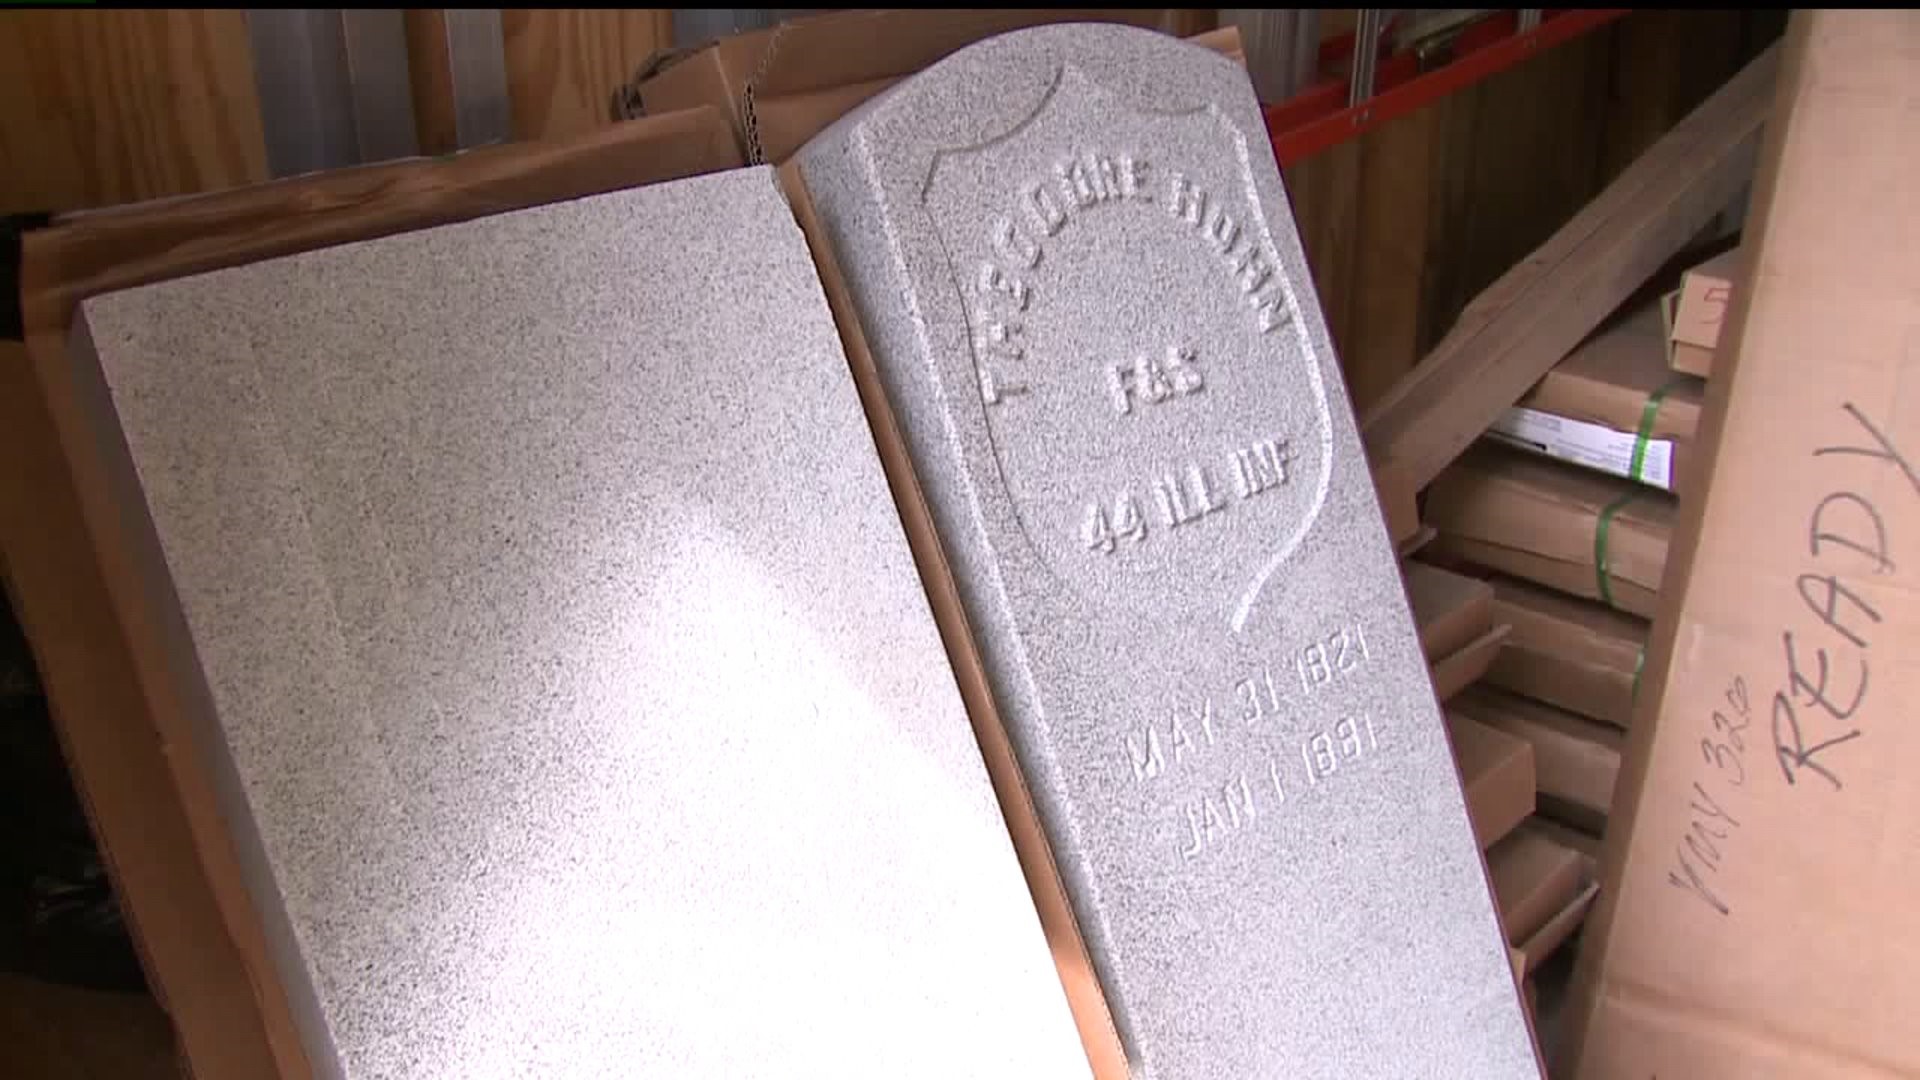 Civil War veterans to get new headstones at City Cemetery